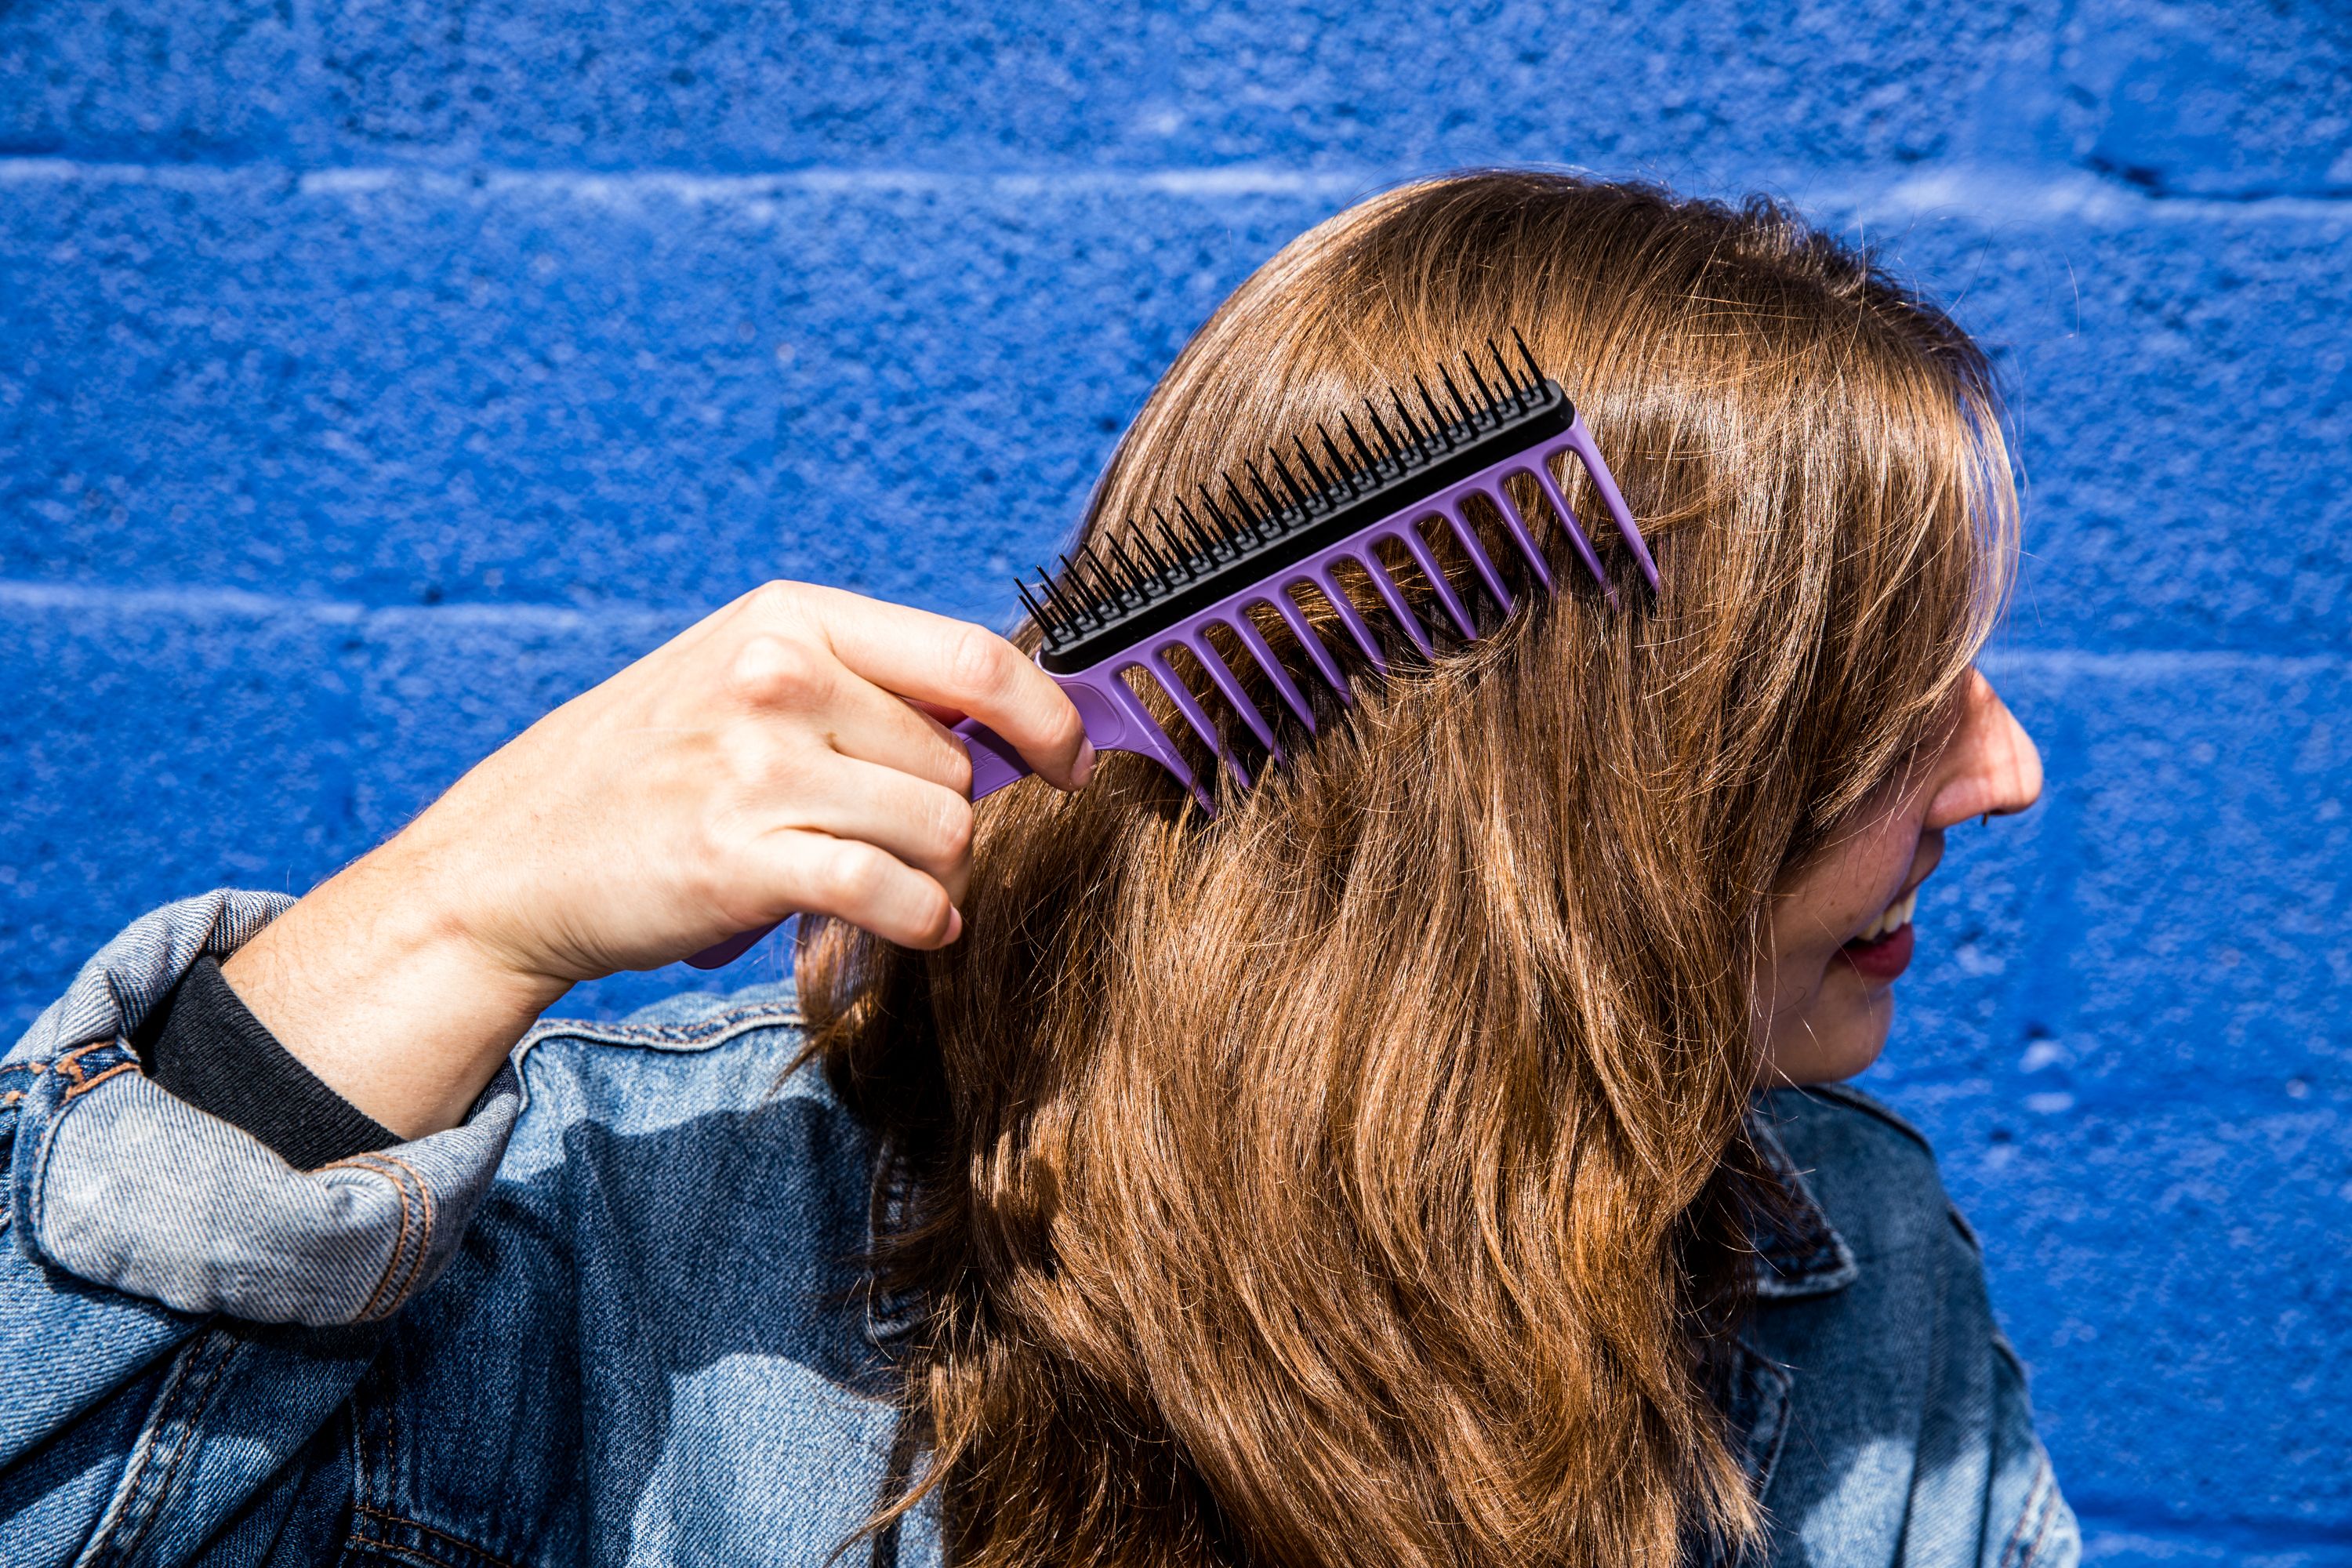 The Best Combs for Detangling and Styling Hair With Zero Pain